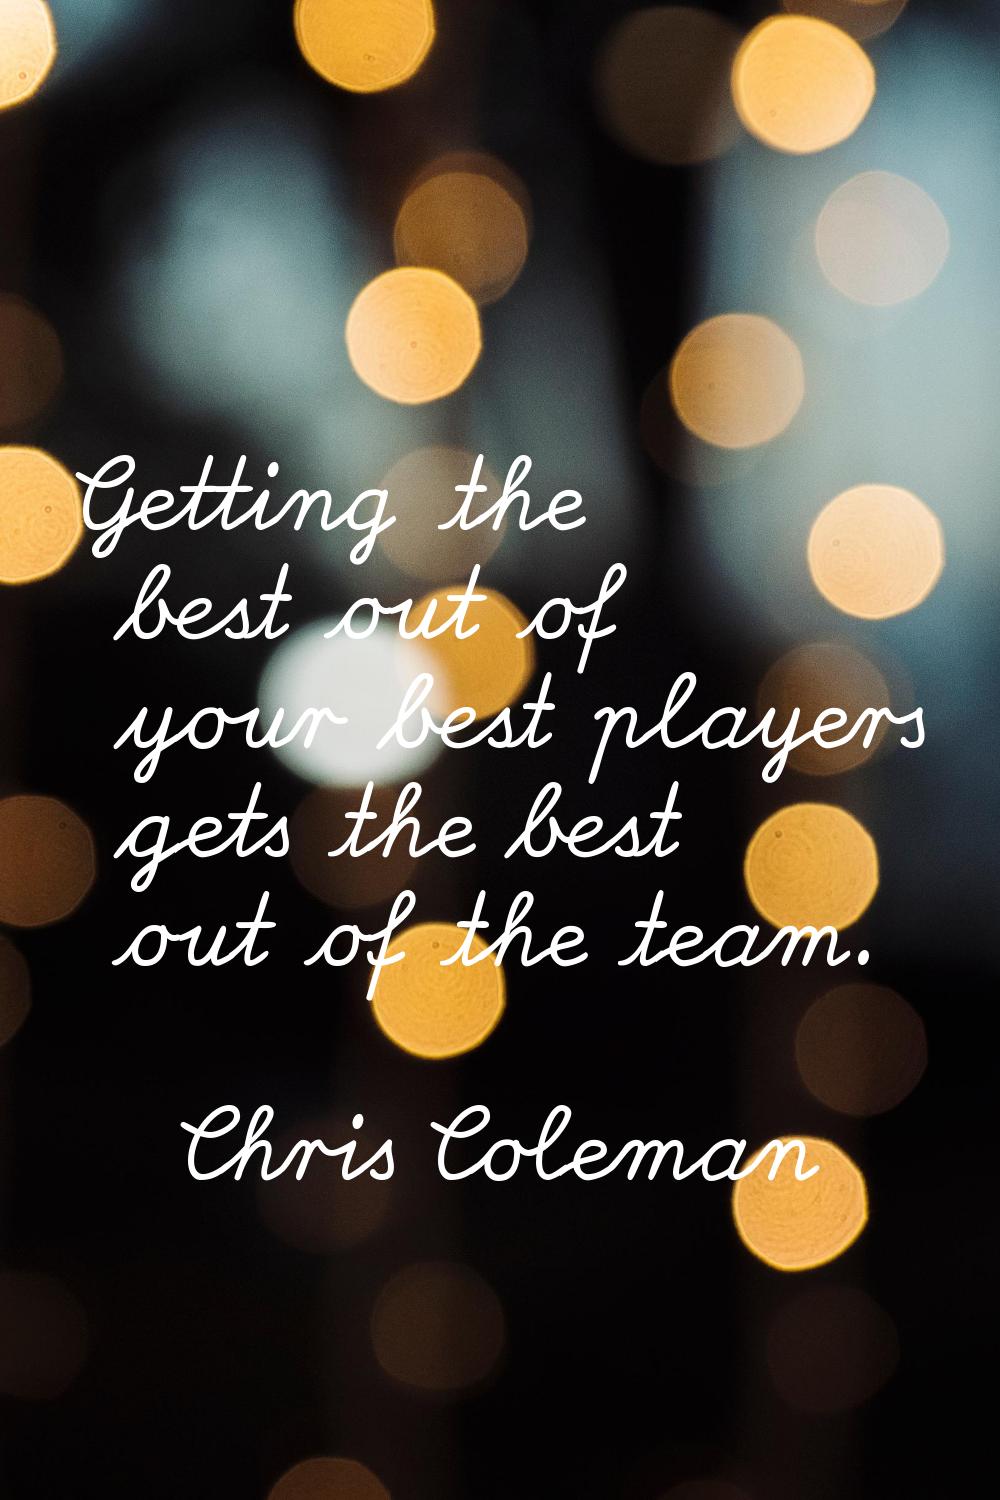 Getting the best out of your best players gets the best out of the team.